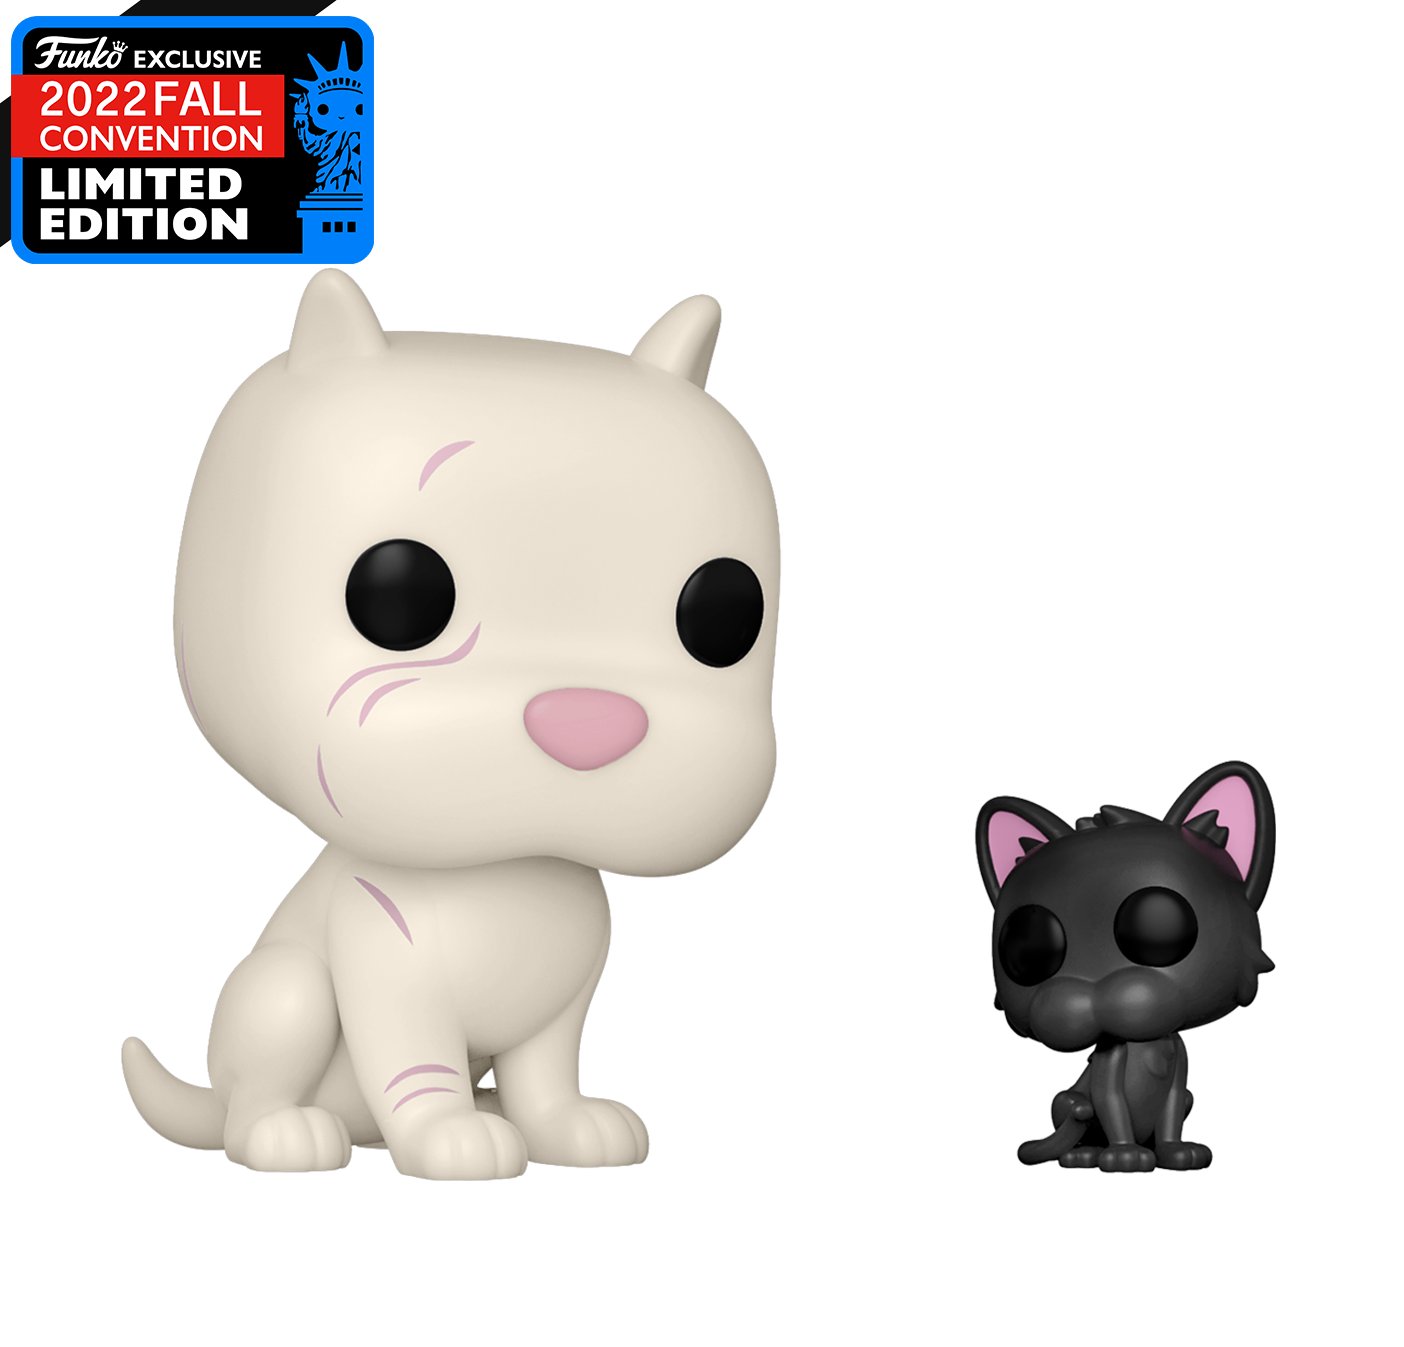 Kitbull - Kit & Doggy NYCC 2022 Fall Convention Exclusive Pop! Vinyl #1238